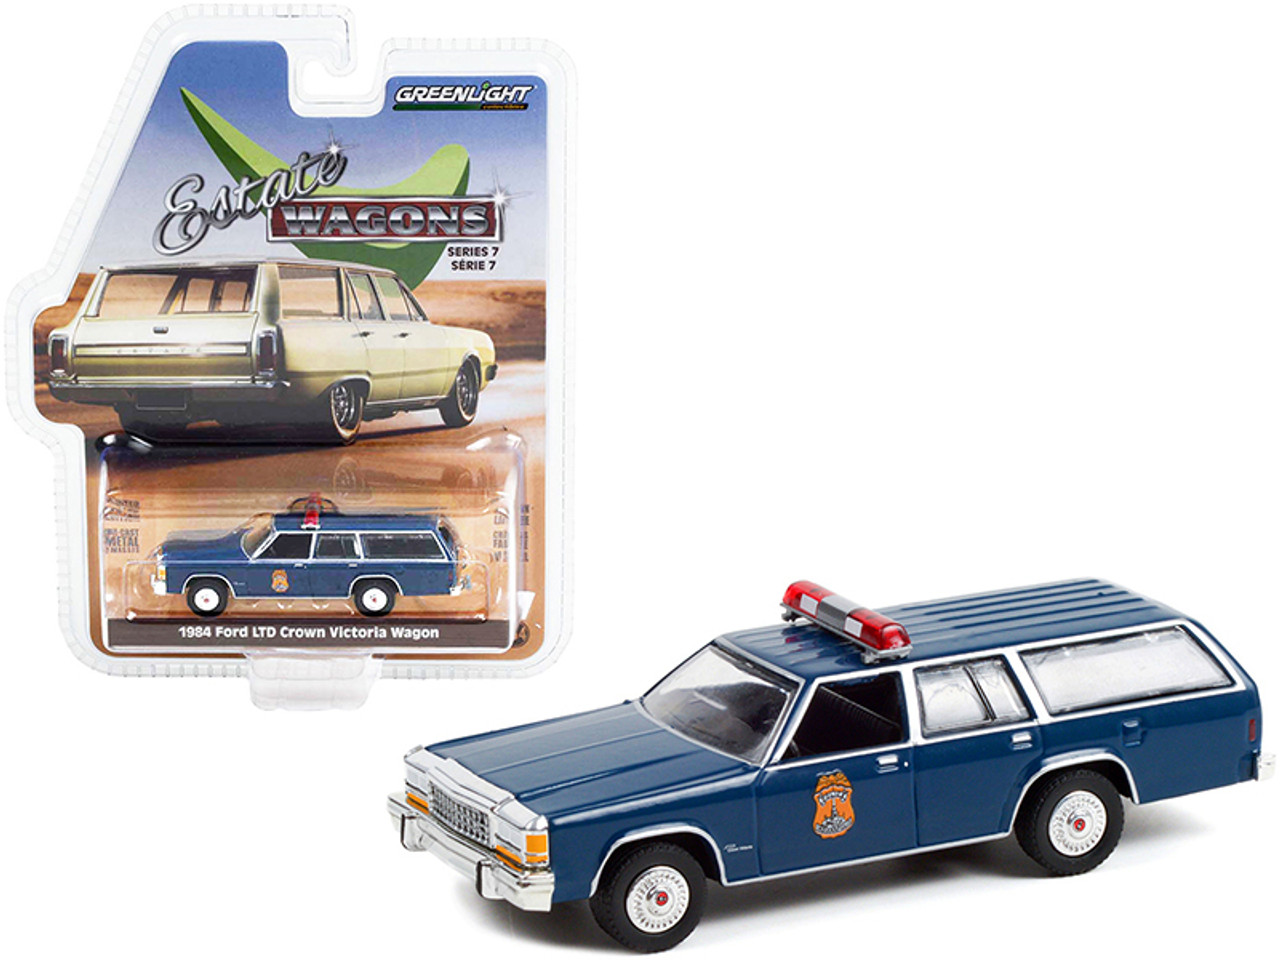 1984 Ford LTD Crown Victoria Wagon Dark Blue "Indianapolis Metropolitan Police Department" (Indiana) "Estate Wagons" Series 7 1/64 Diecast Model Car by Greenlight